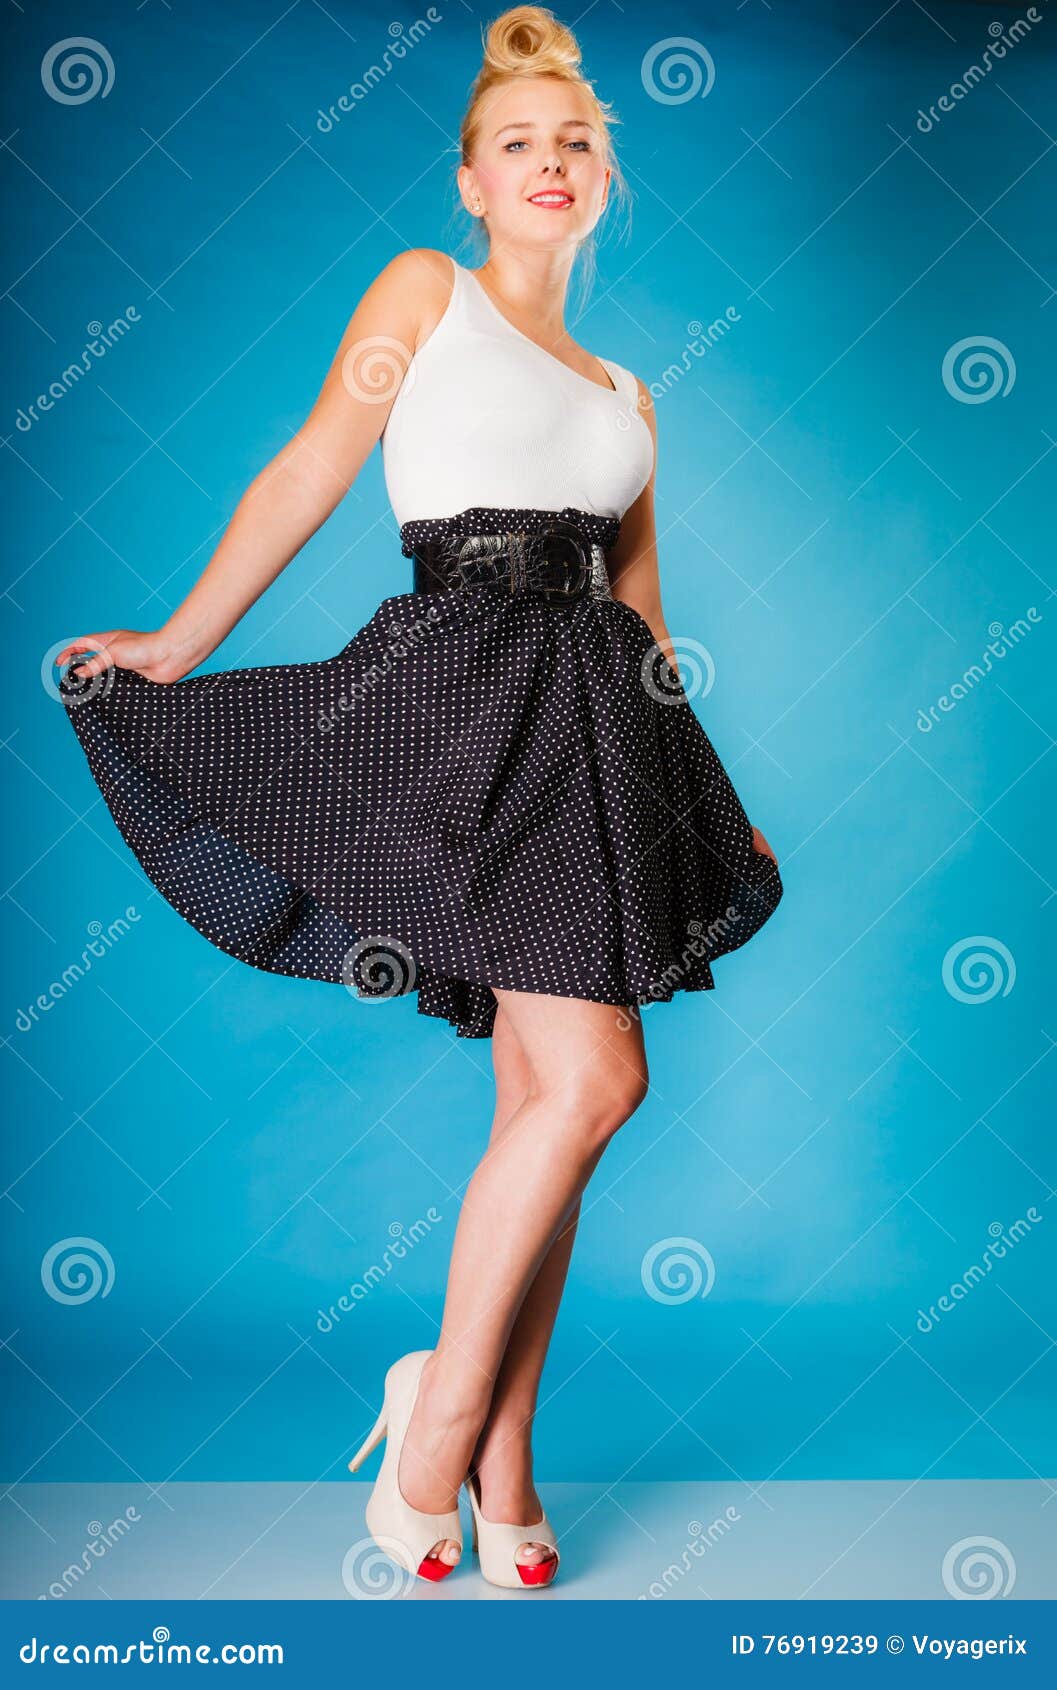 Pin up girl retro style. stock image. Image of dance - 76919239